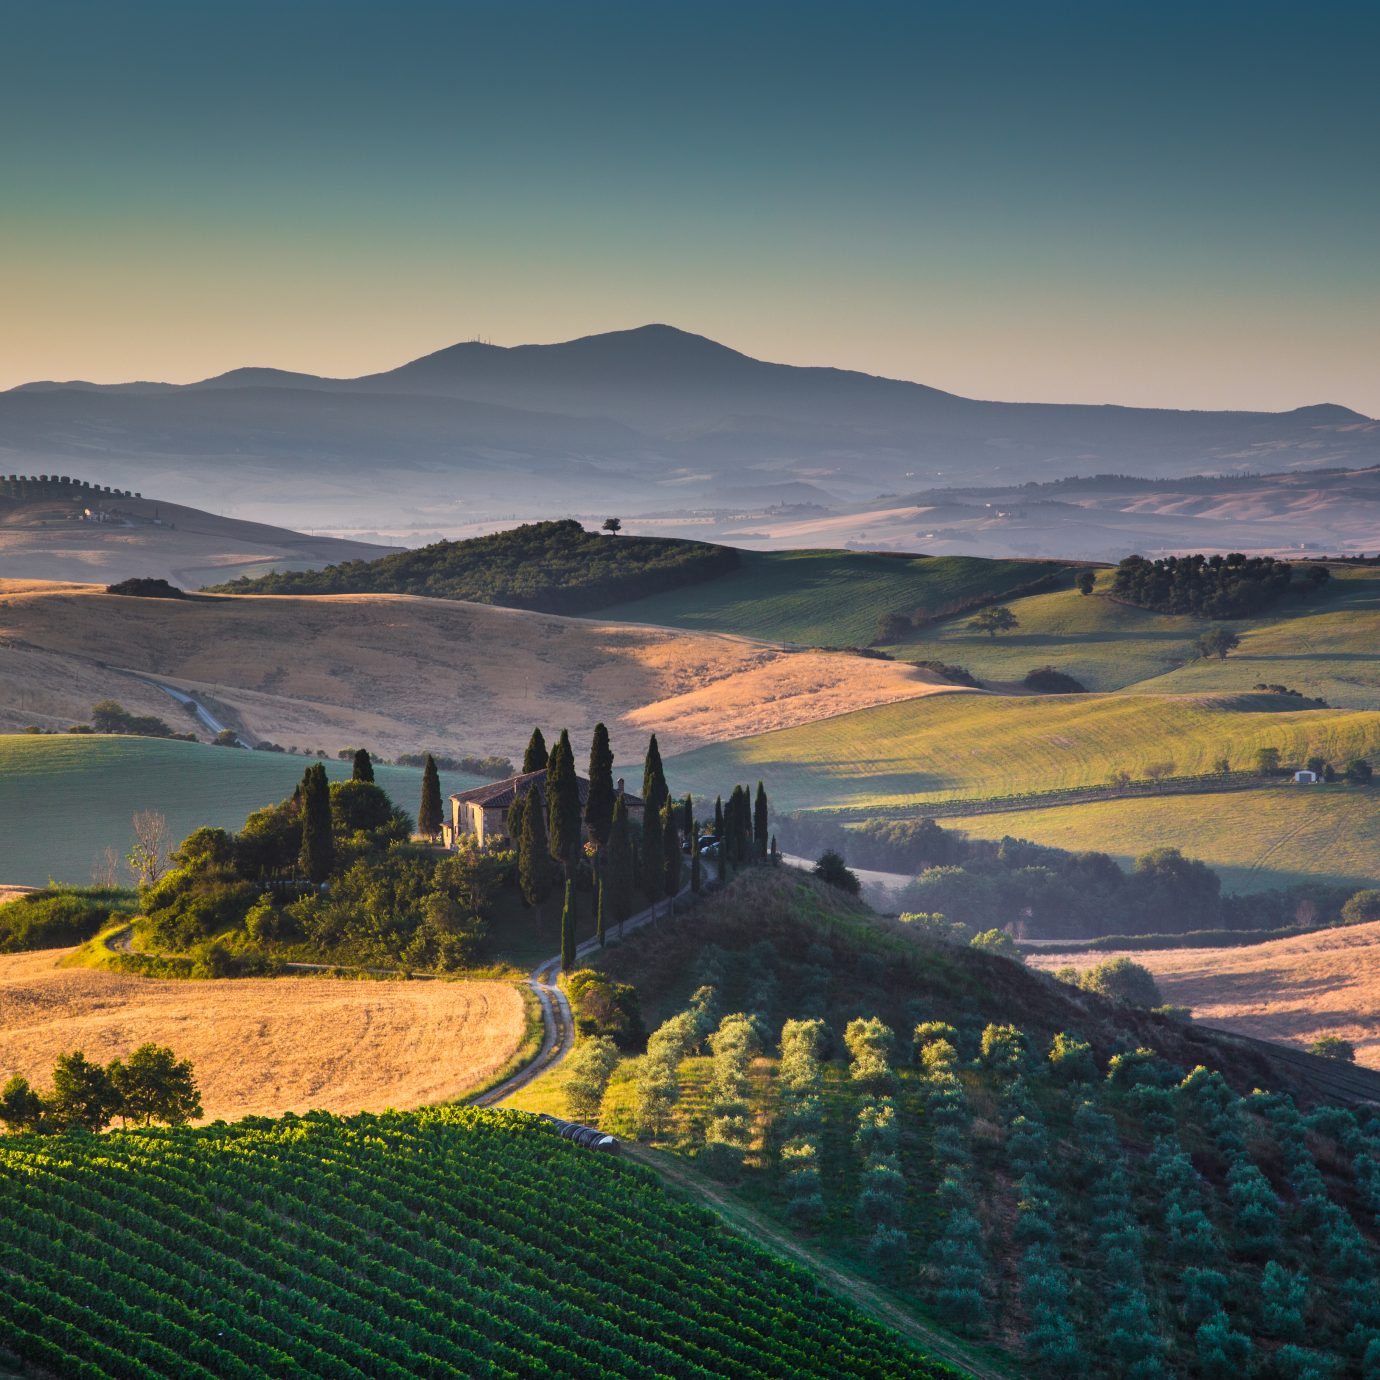 Scenic Tuscany landscape with rolling hills and valleys in golden morning light, Val d'Orcia, Italy.